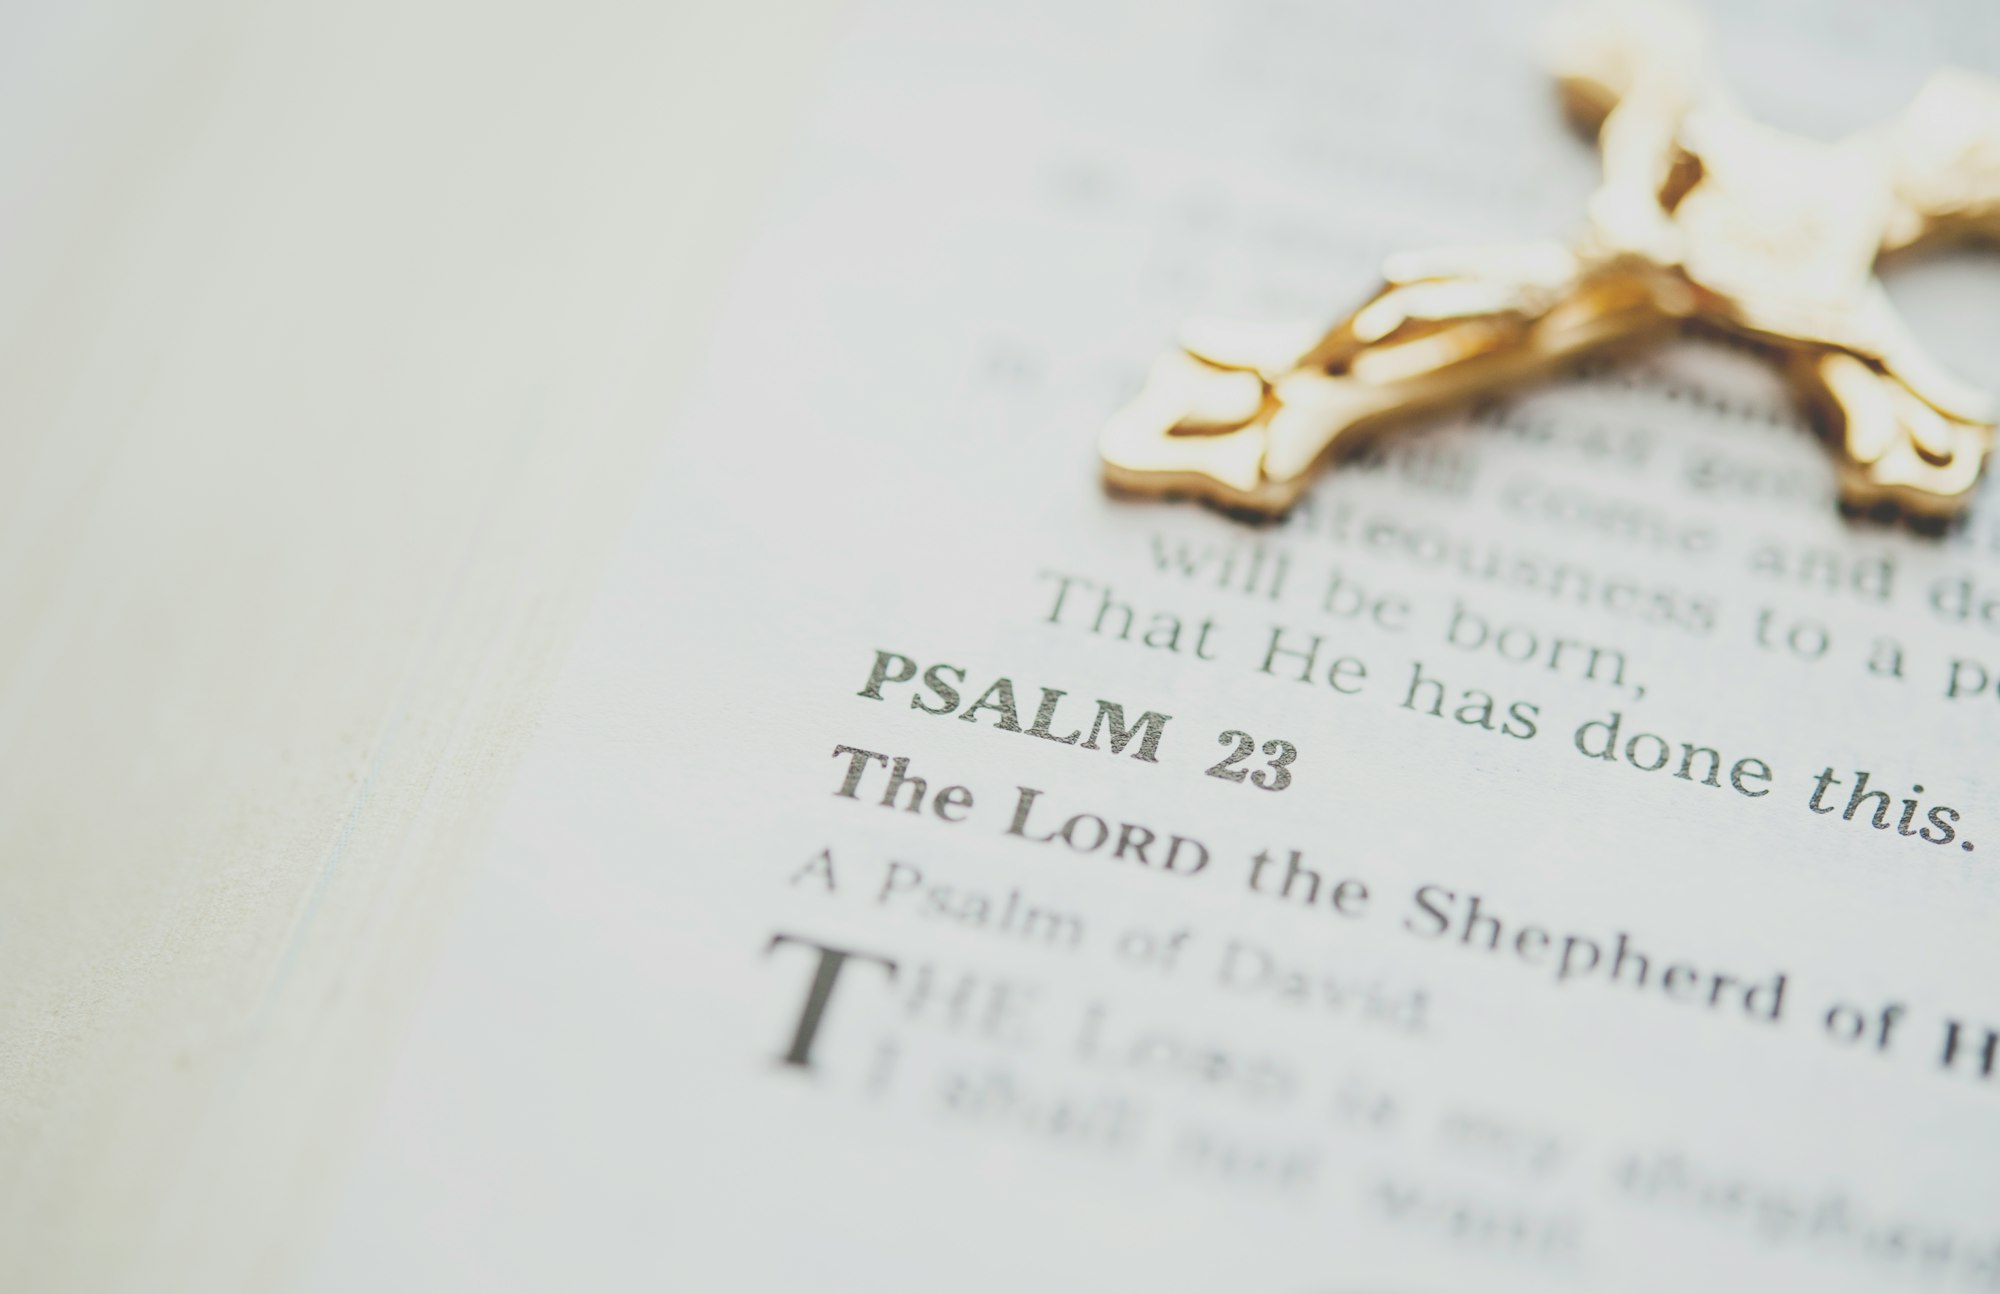 The Lord is my Shepherd text with cross in background